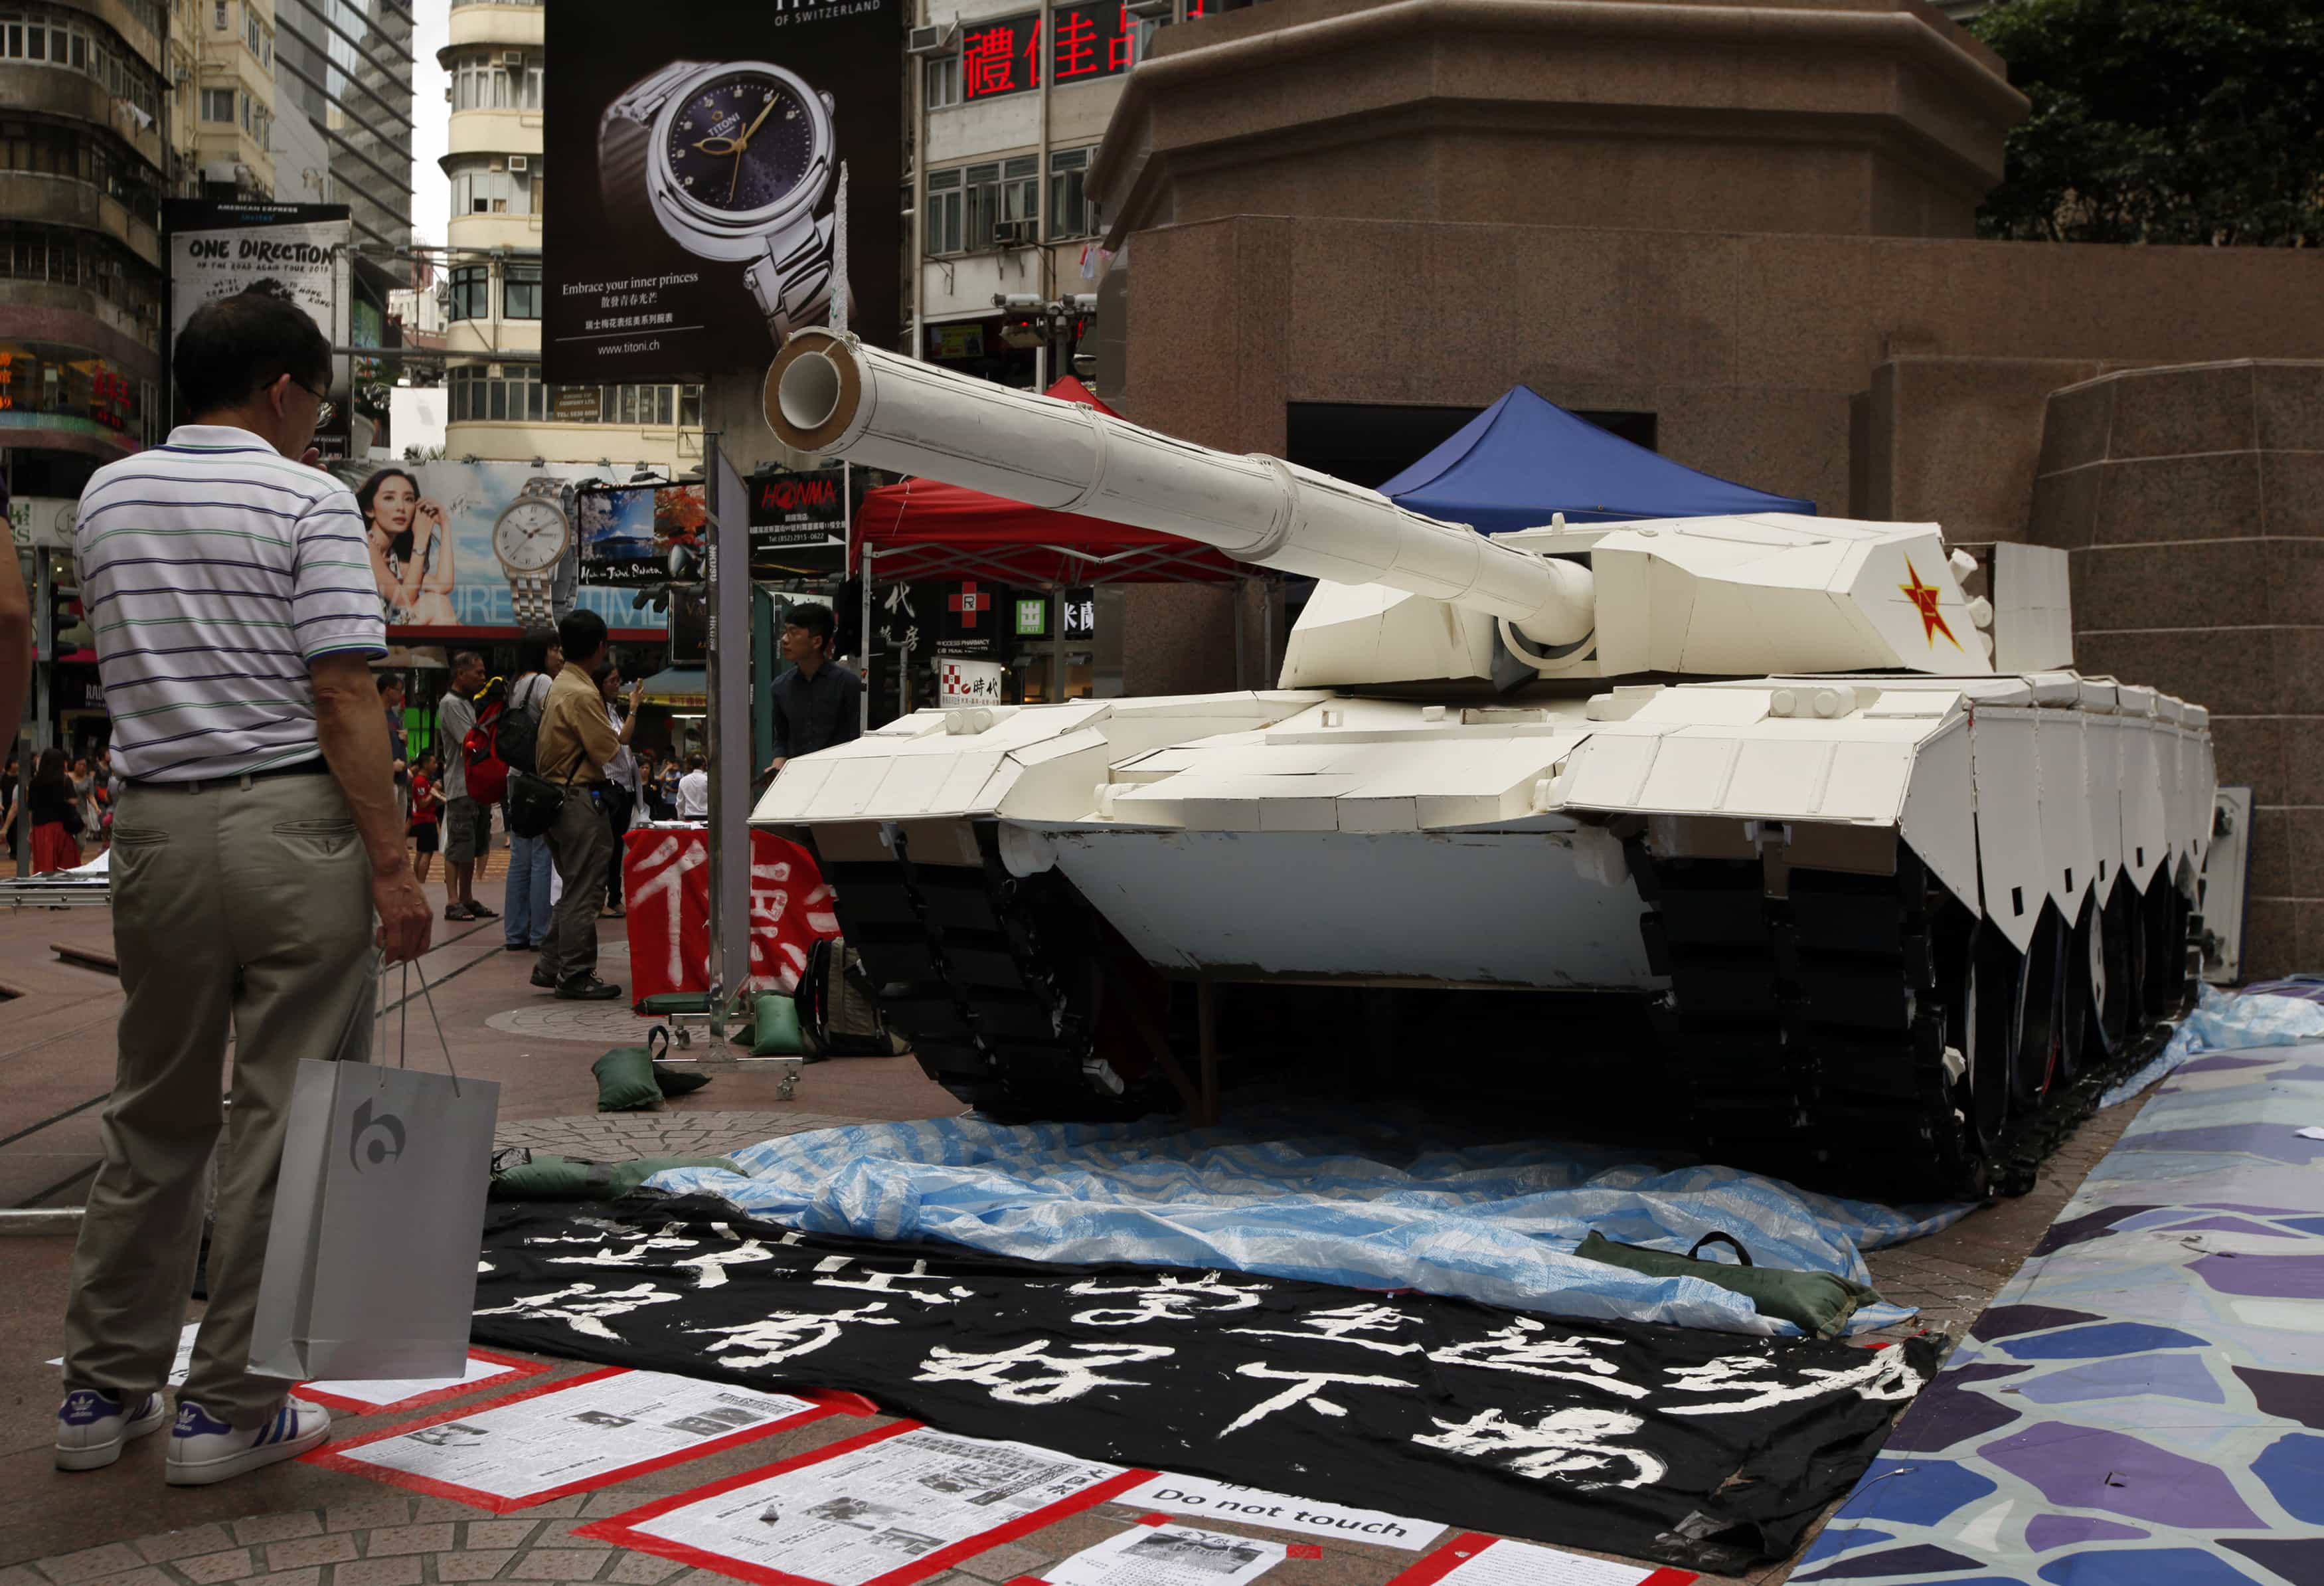 A shopper stands in front of a mock tank imitating those used during the 1989 crackdown in Tiananmen Square. Image taken in Hong Kong, 3 June 2014, REUTERS/Bobby Yip